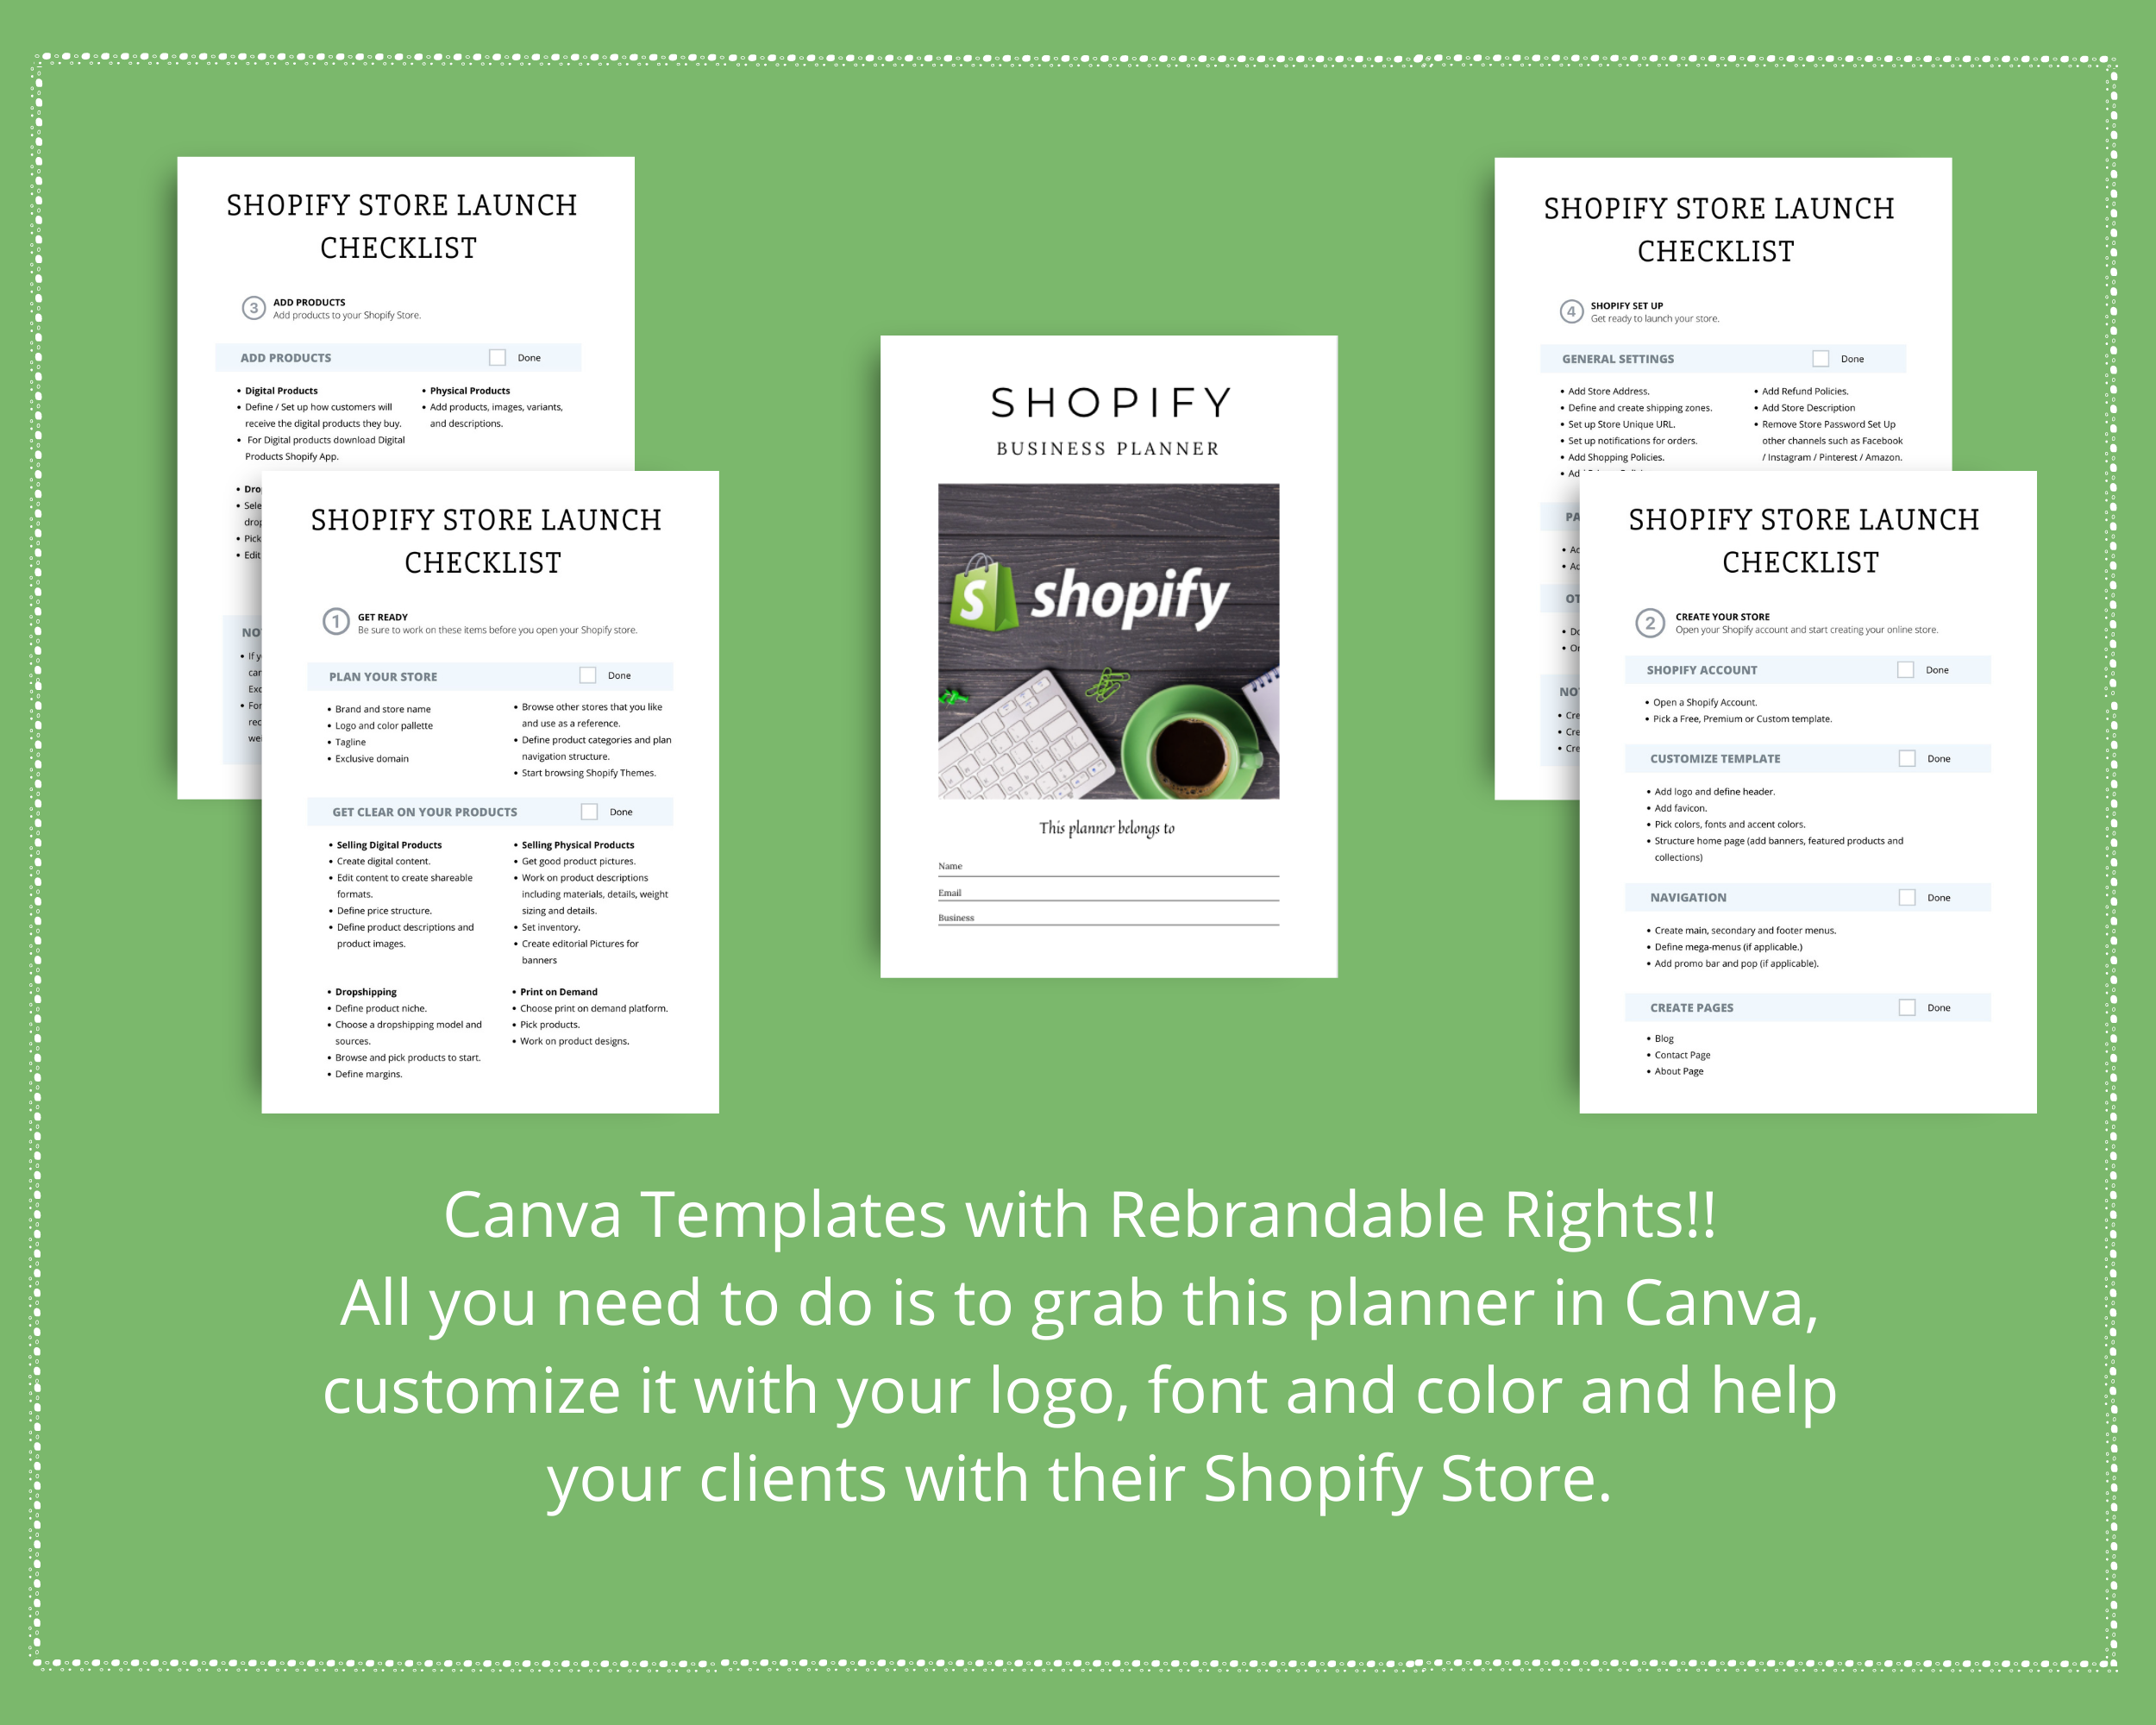 Editable Shopify Store Planner in Canva | Commercial Use